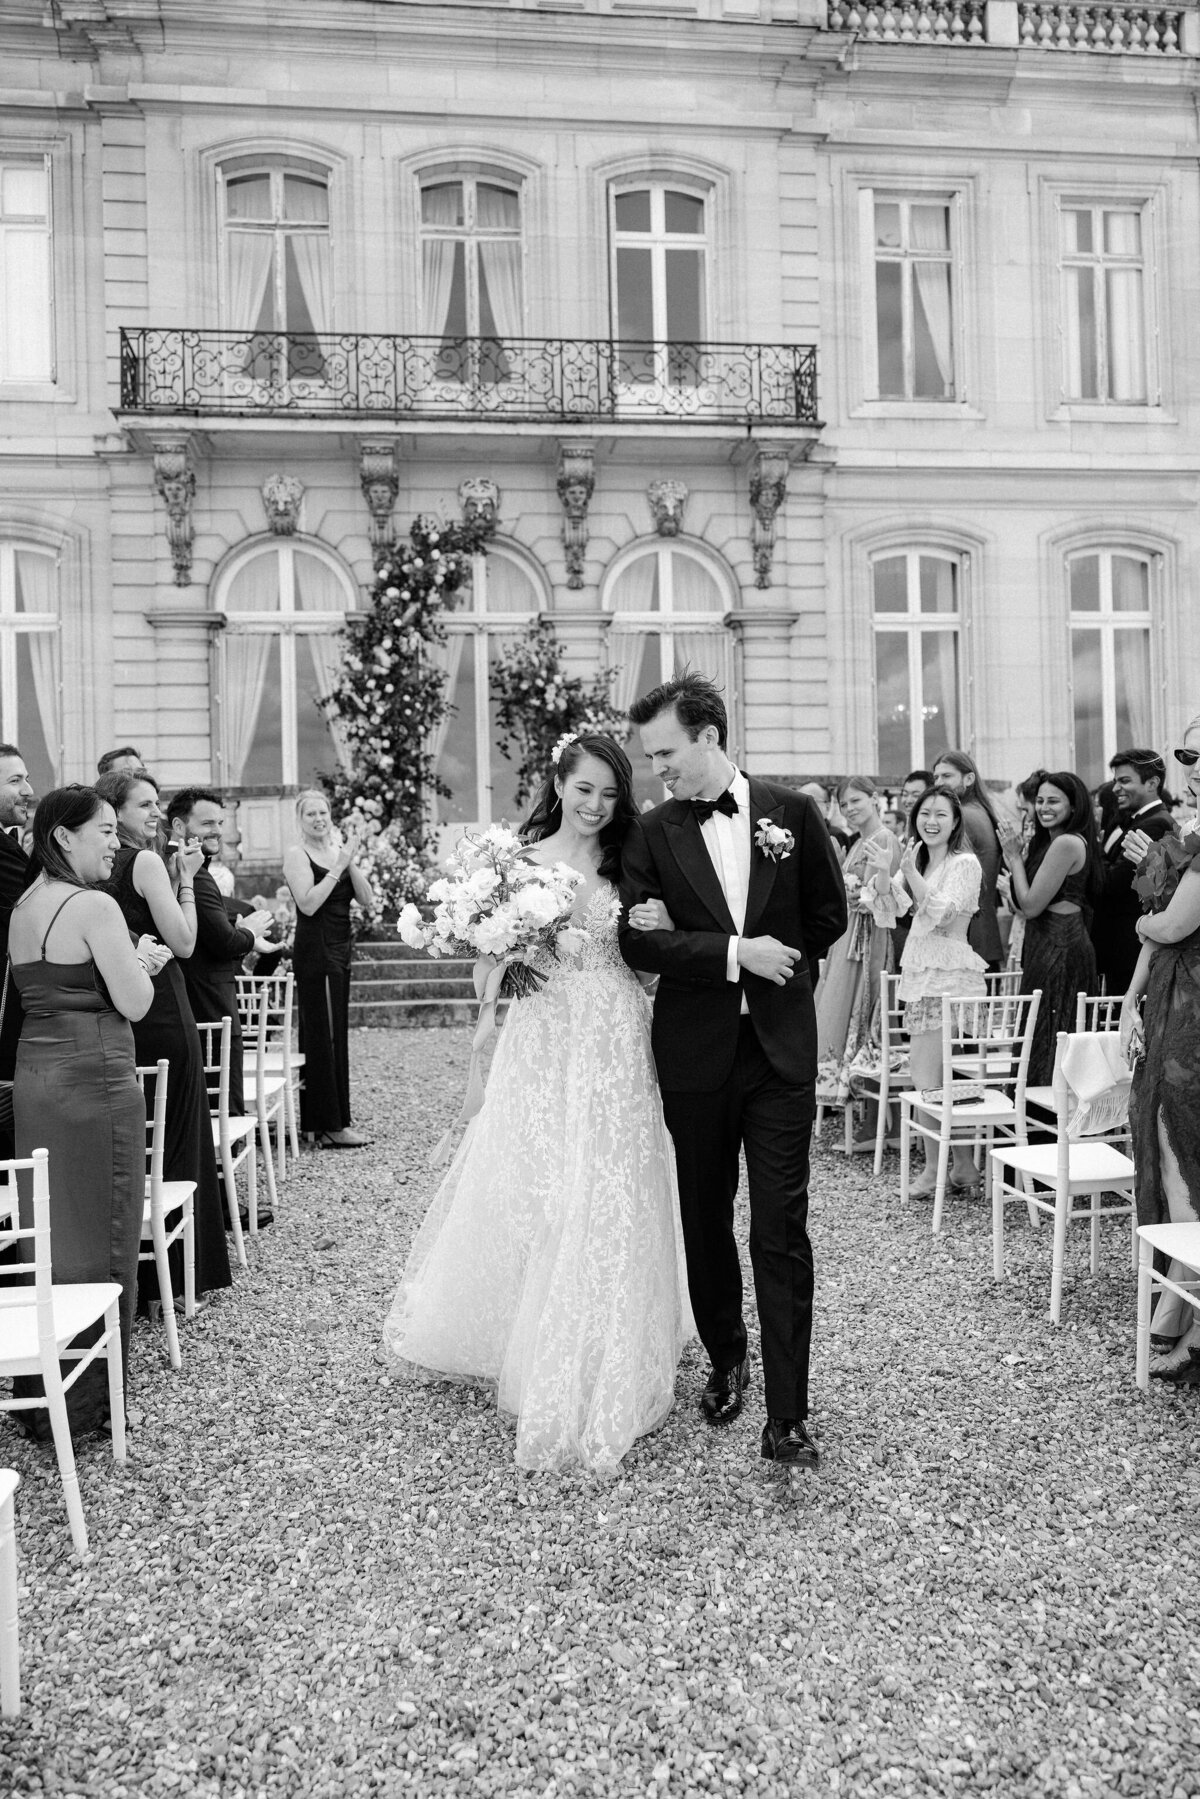 Jennifer Fox Weddings English speaking wedding planning & design agency in France crafting refined and bespoke weddings and celebrations Provence, Paris and destination 363